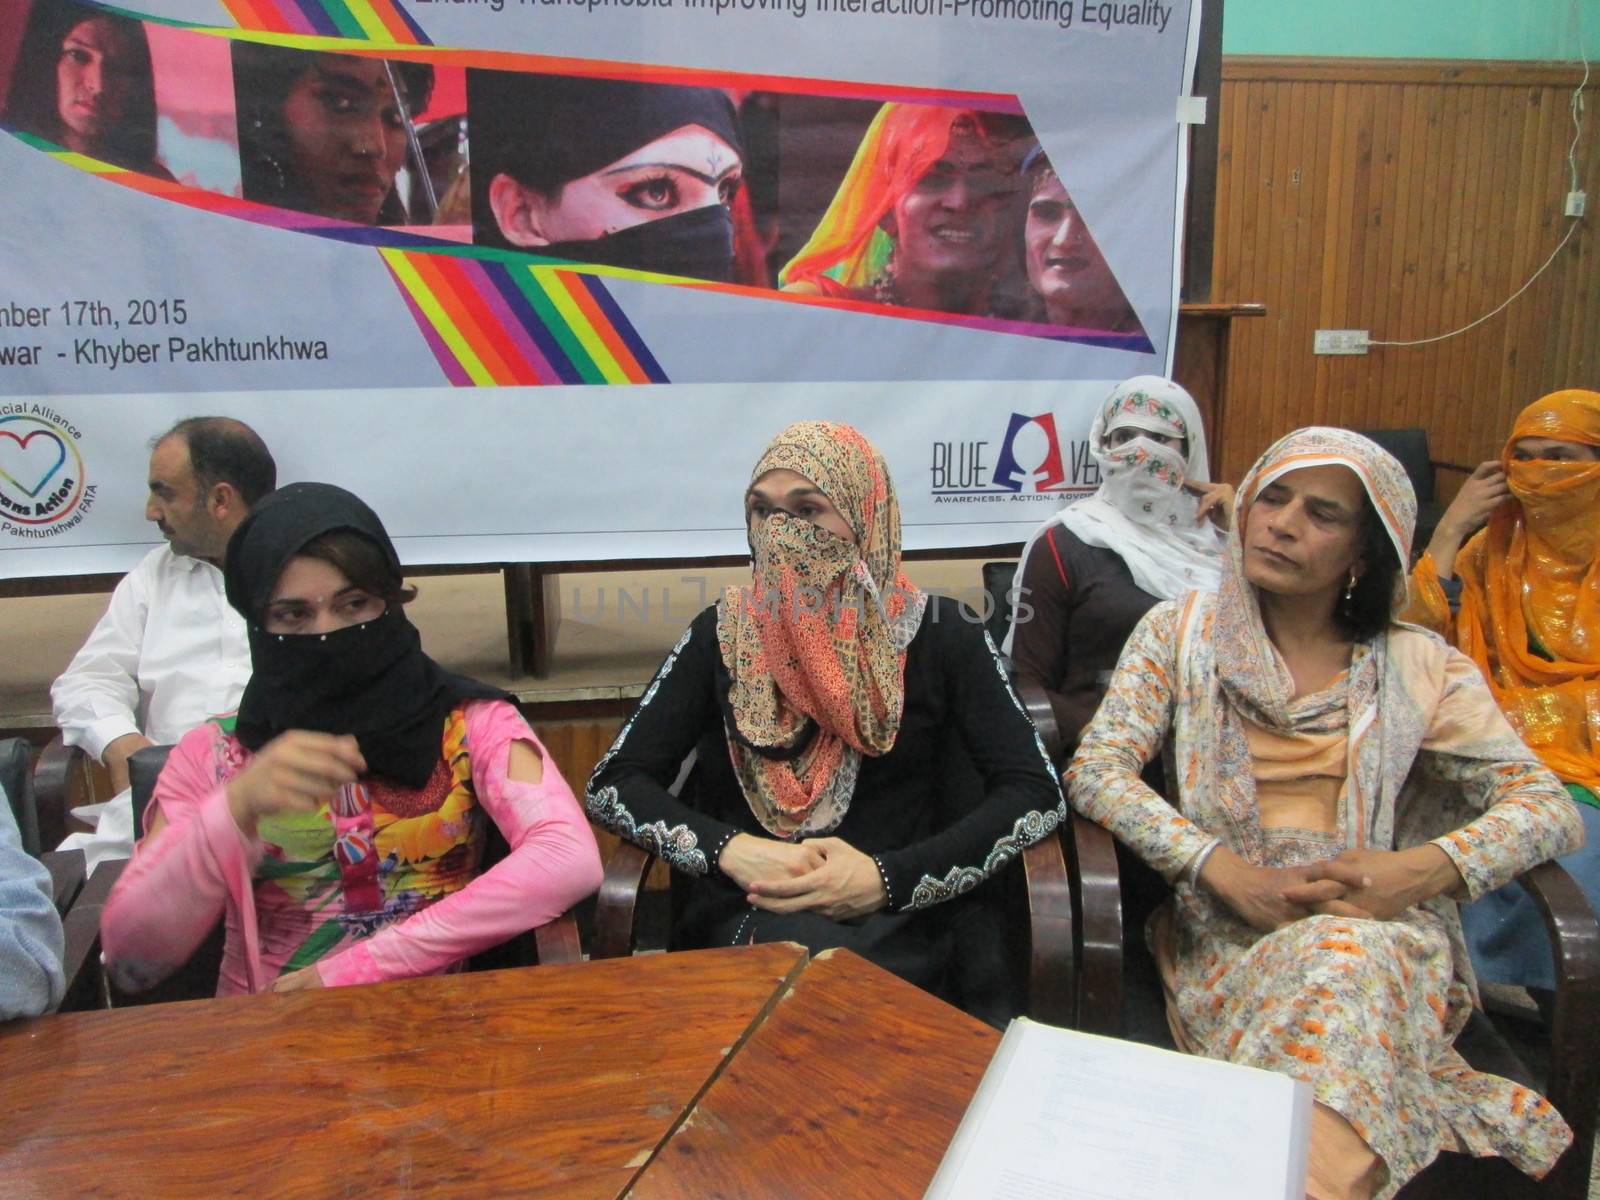 PAKISTAN, Peshawar: Transgender individuals from 14 different Pakistani districts represented their communities in a  multi-stakeholder  consultation on September 17, 2015 in Peshawar.   The consultation addressed the transgender community's need for protection and equal rights. Issues such as displacement, sex work, harassment were addressed. The consultation put forward recommendations to the government on how to increase the legal protections of transgender individuals.  